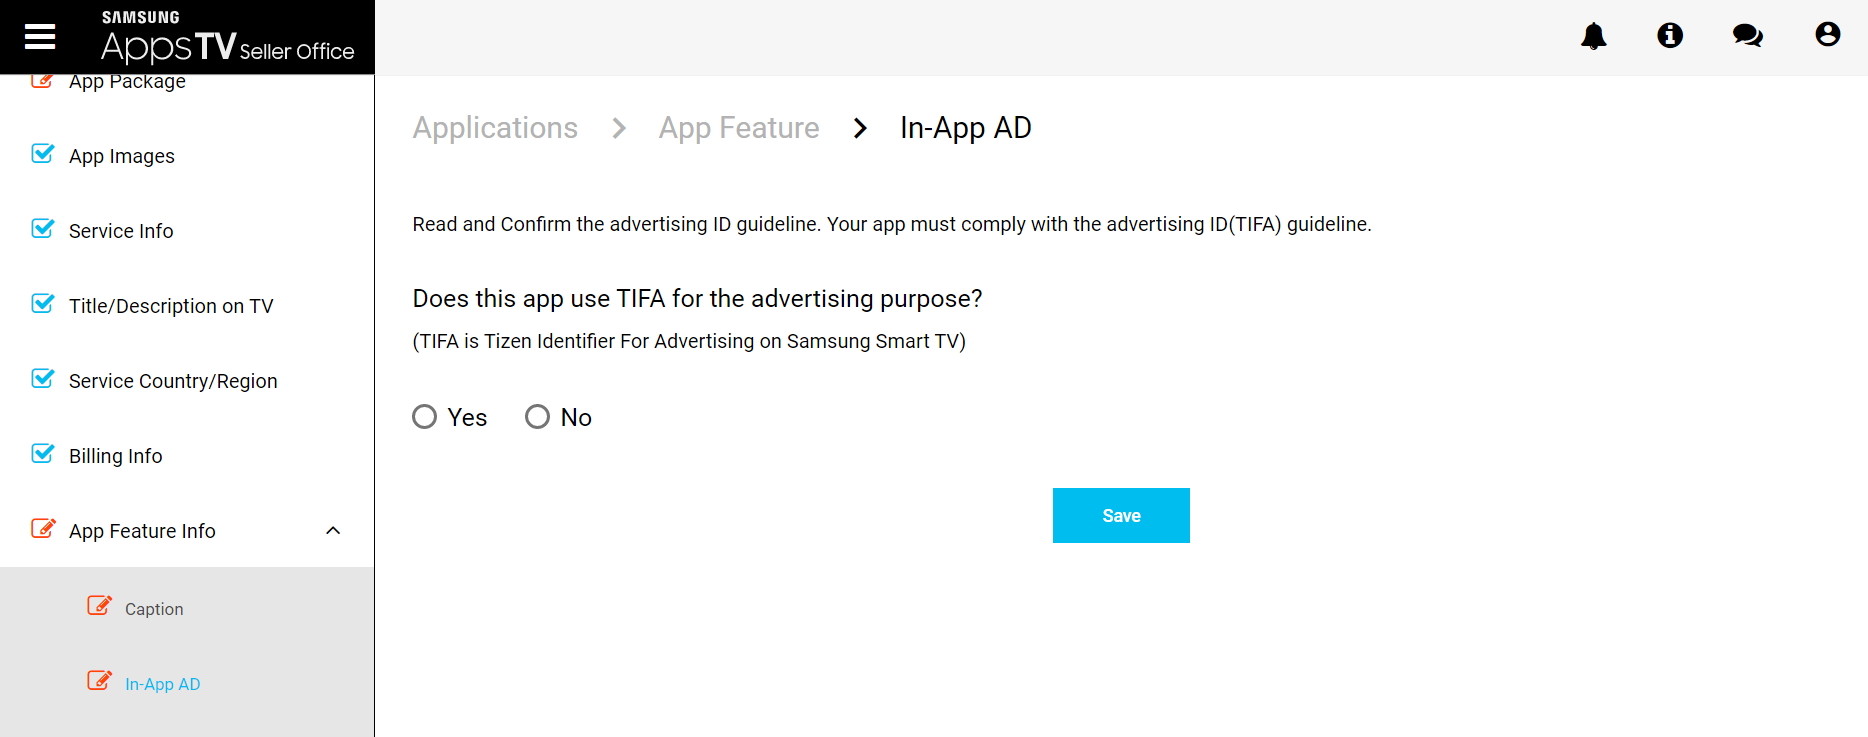 Figure 8. Additional Info for In-app AD Feature